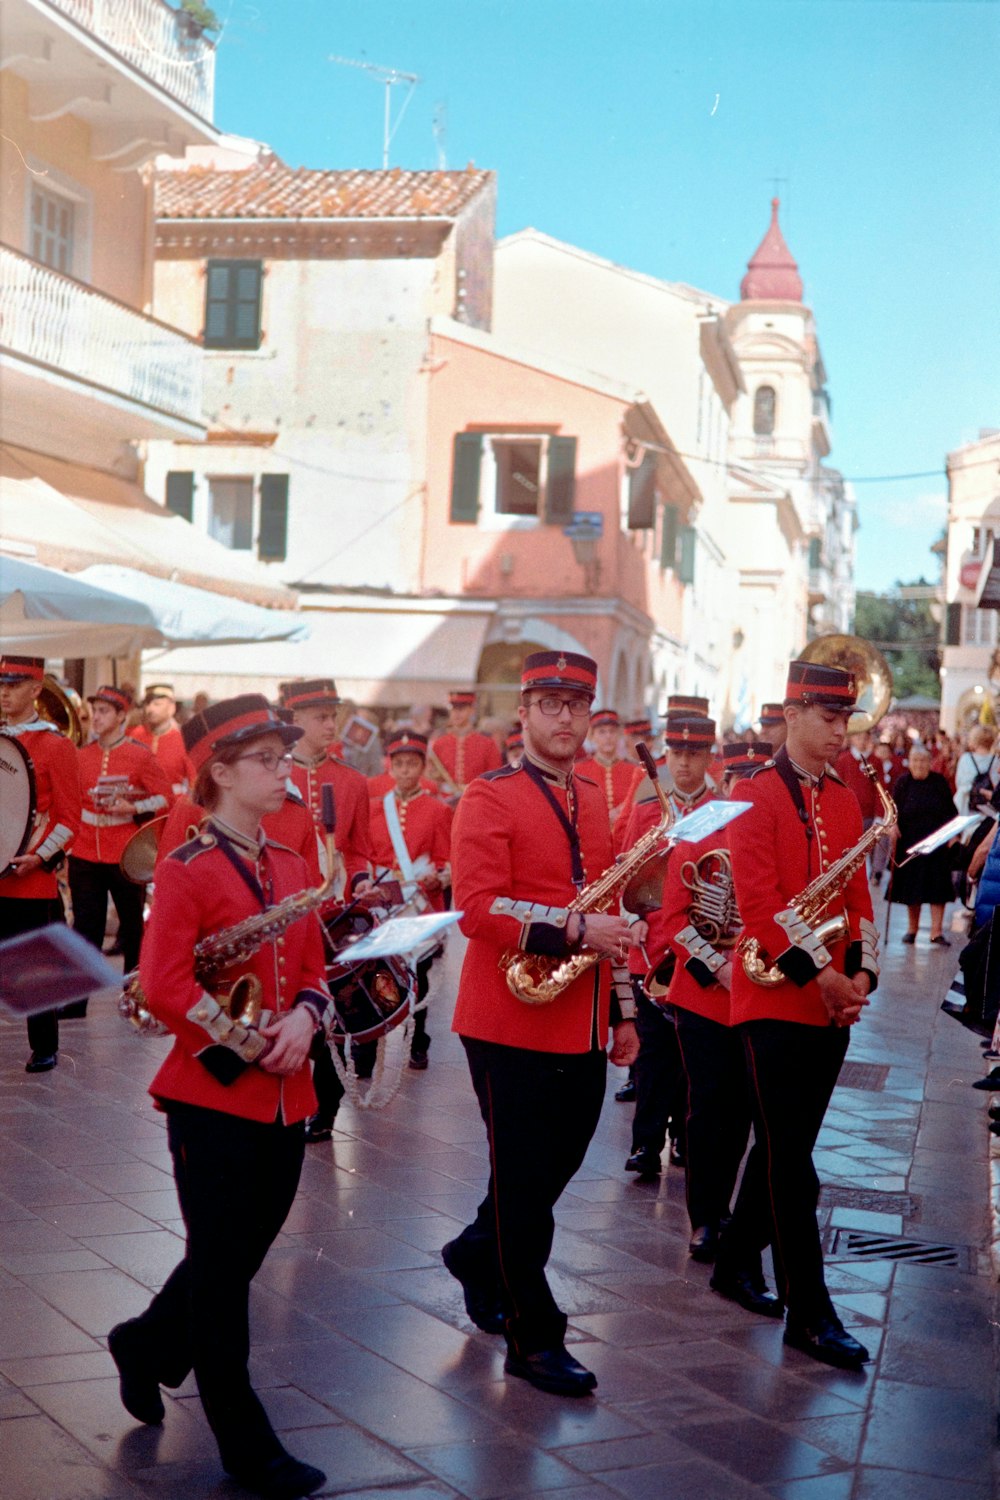 a group of men in red uniforms marching down a street